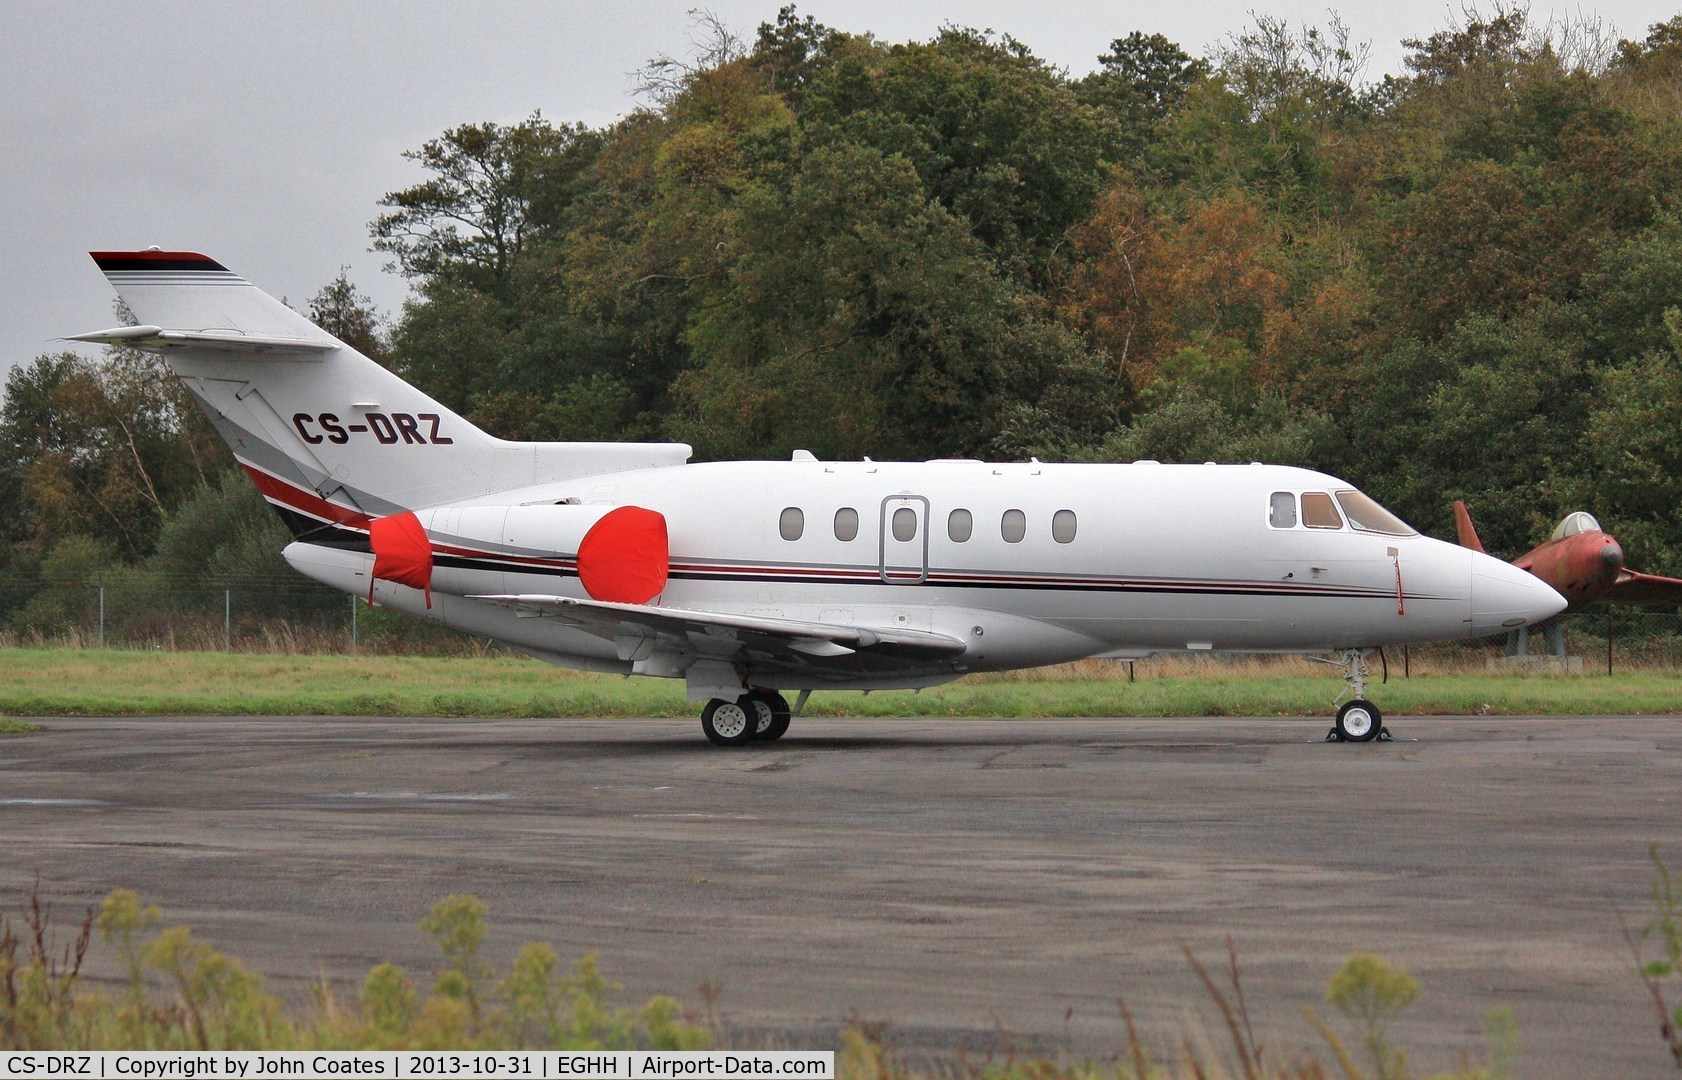 CS-DRZ, 2007 Hawker Beechcraft 800XPi C/N 258847, Parked at JETS